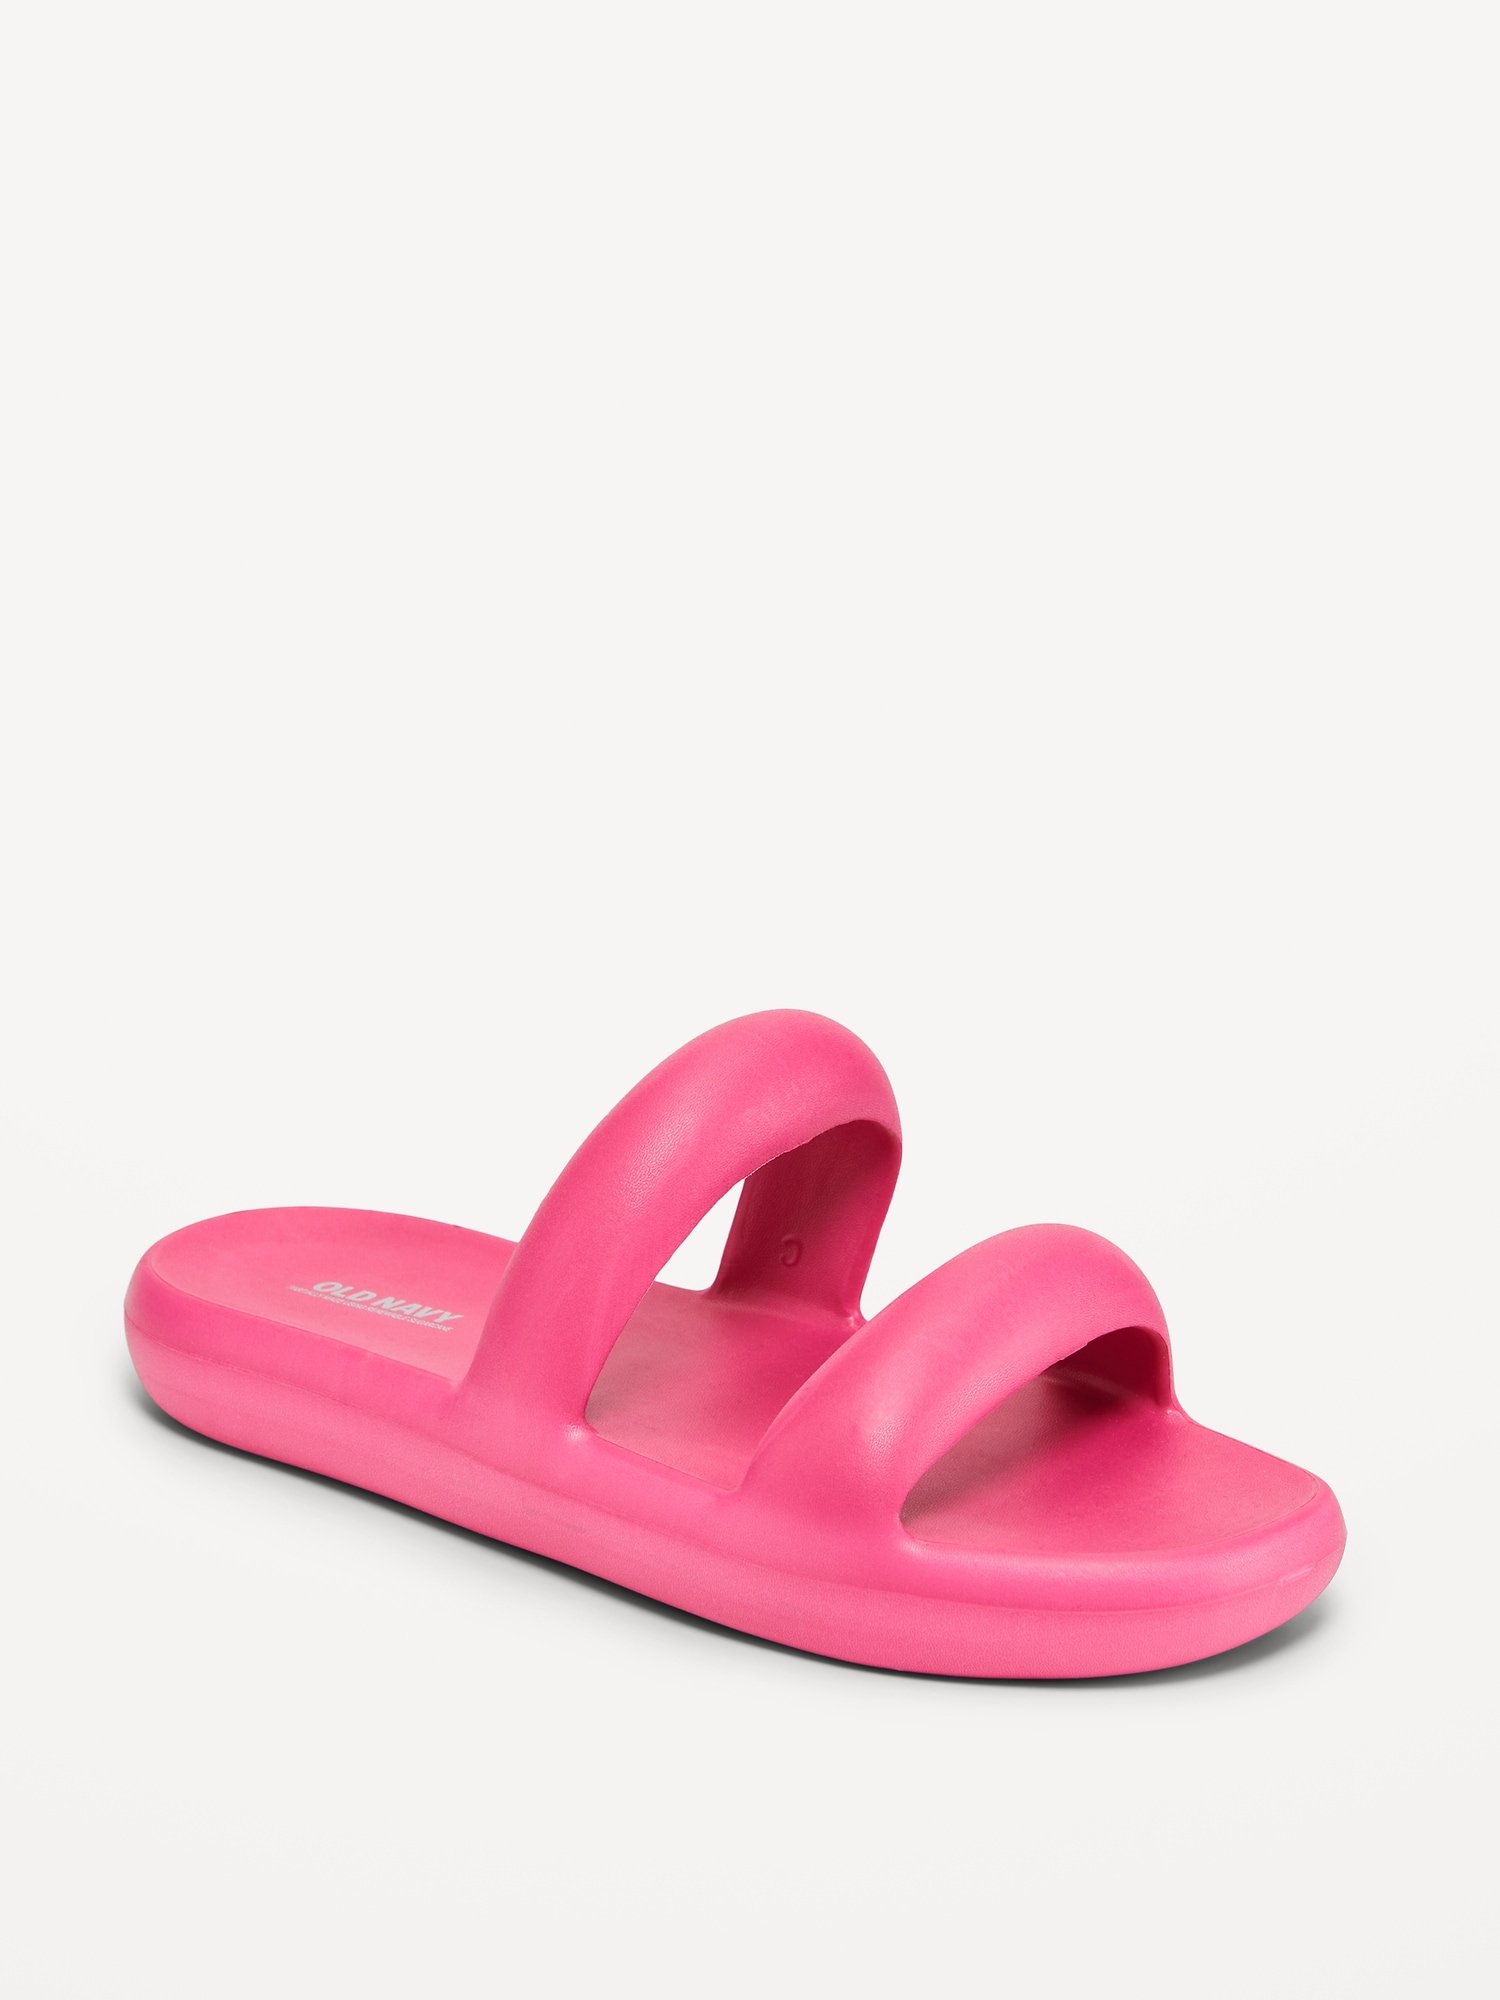 Double-Strap Puff Slide Sandals | Old Navy